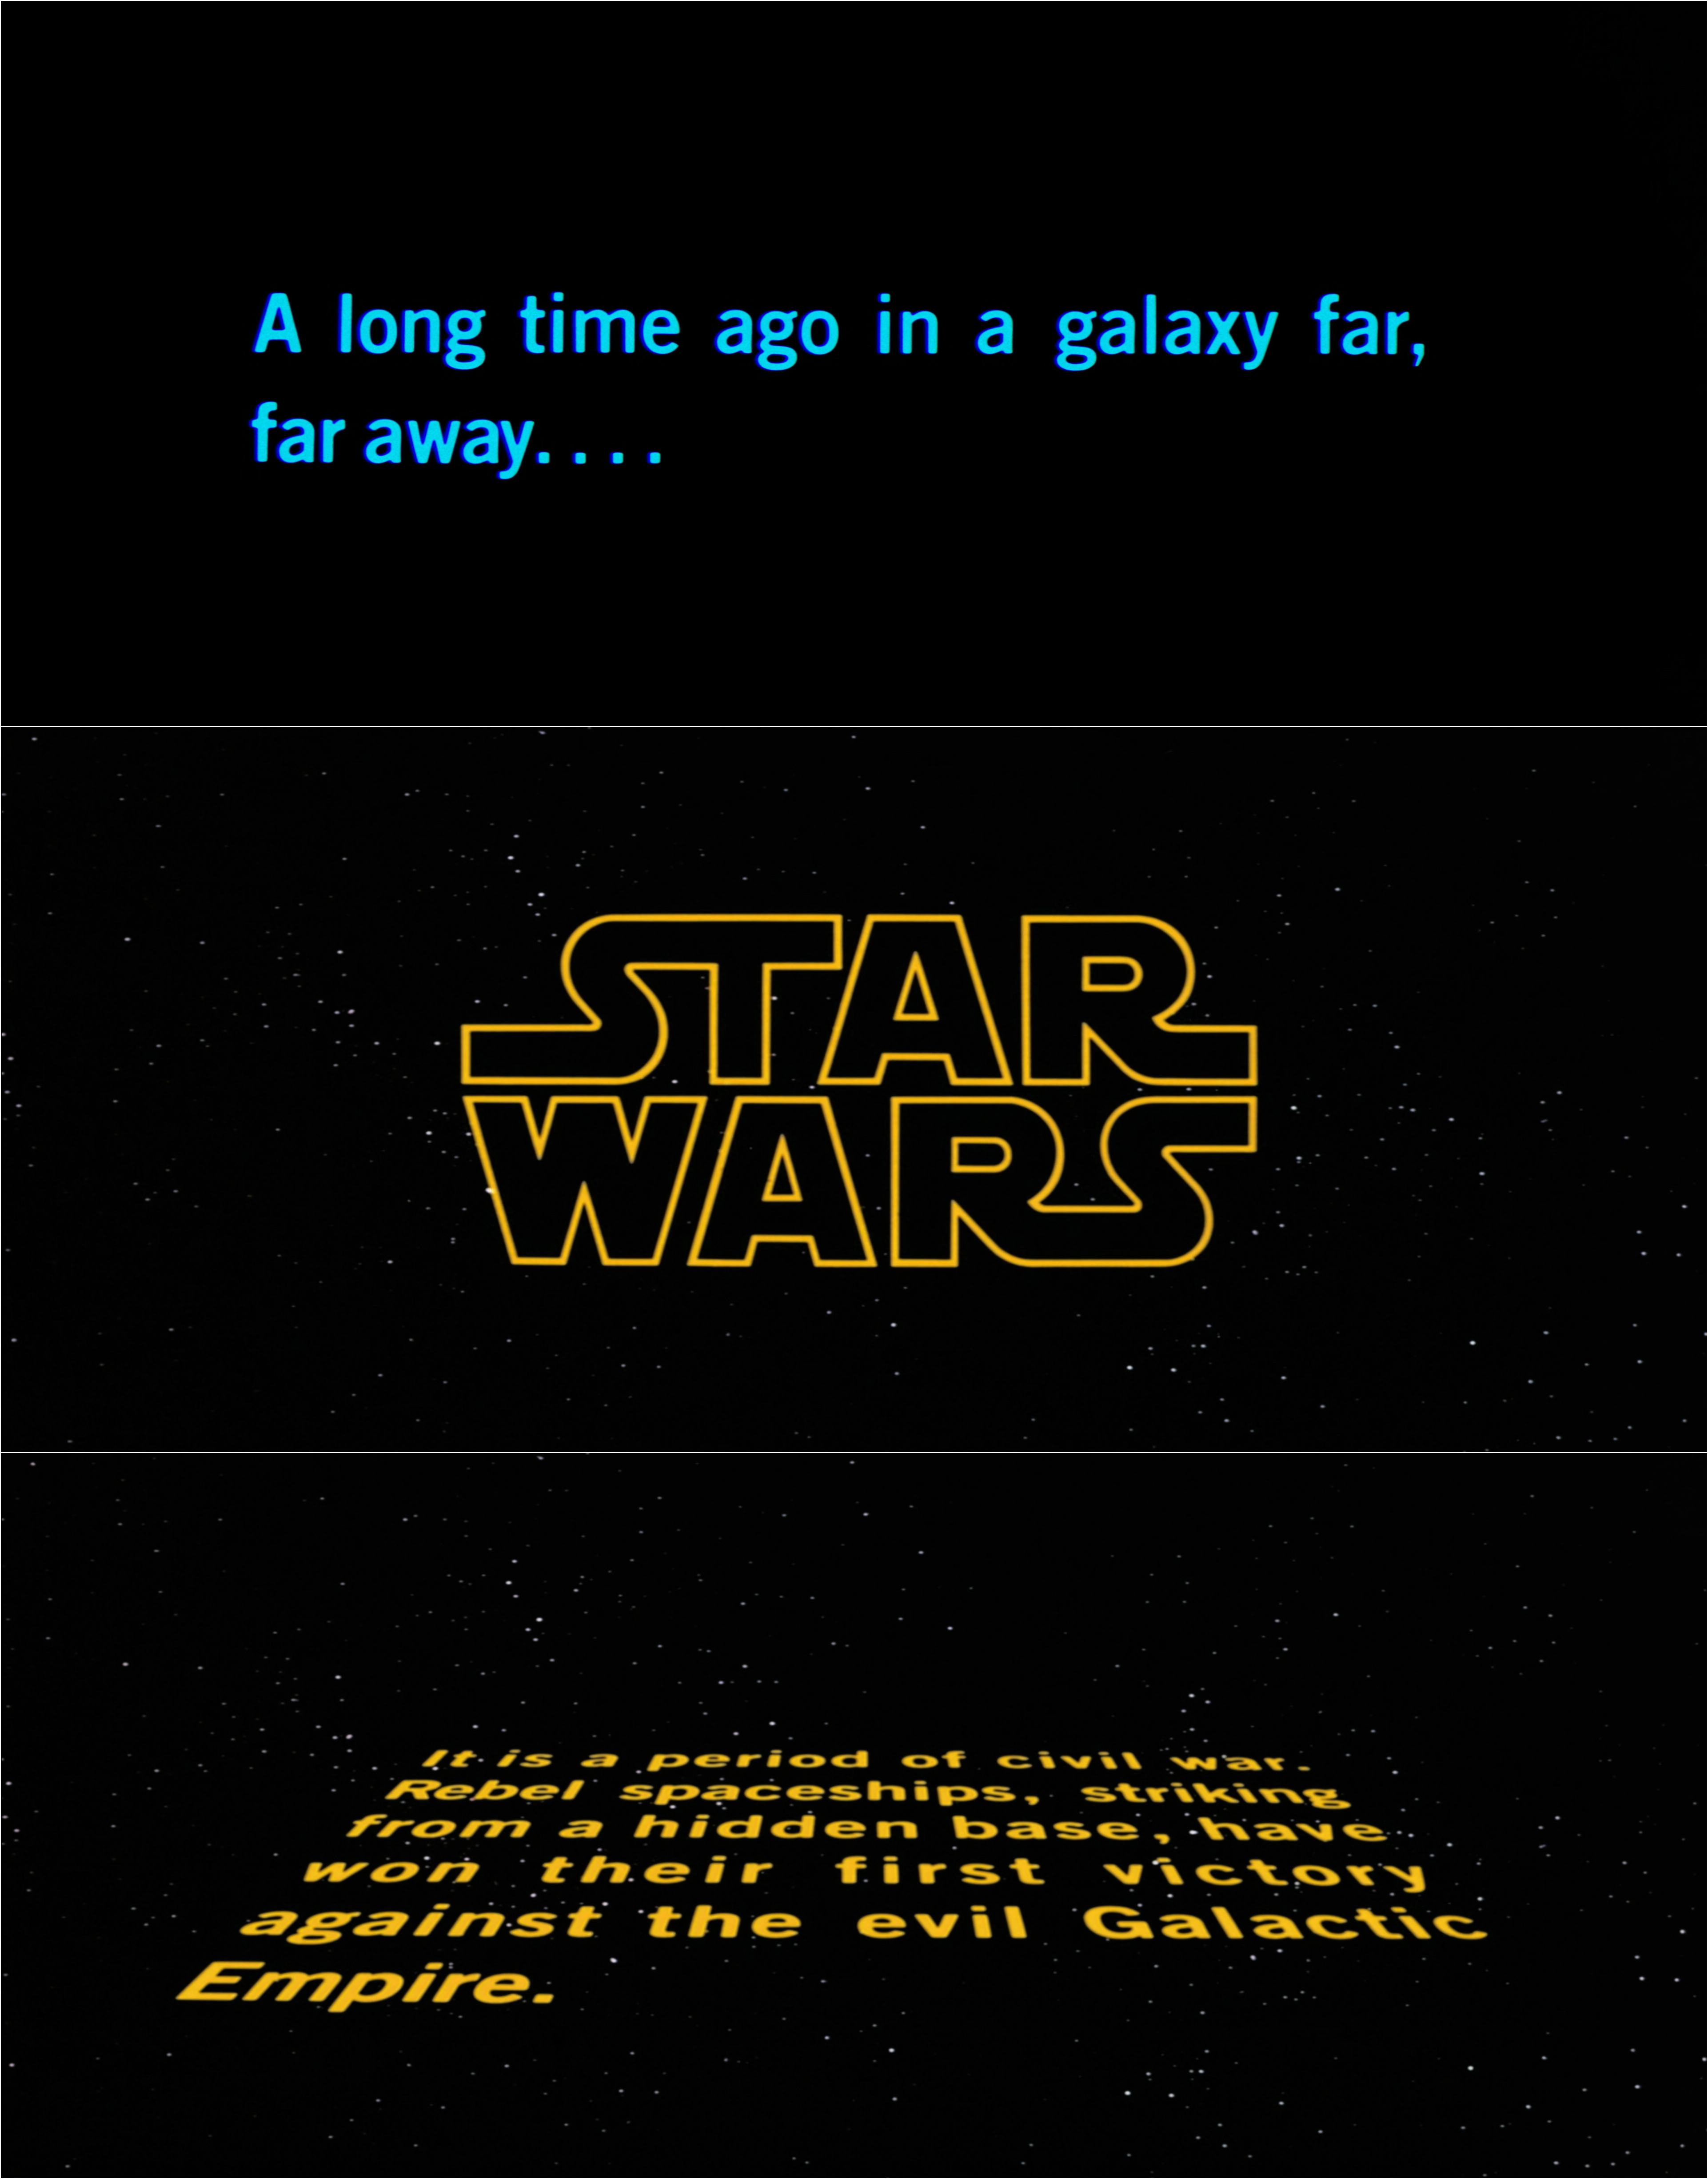 Star Wars opening crawl and titles - Fonts In Use